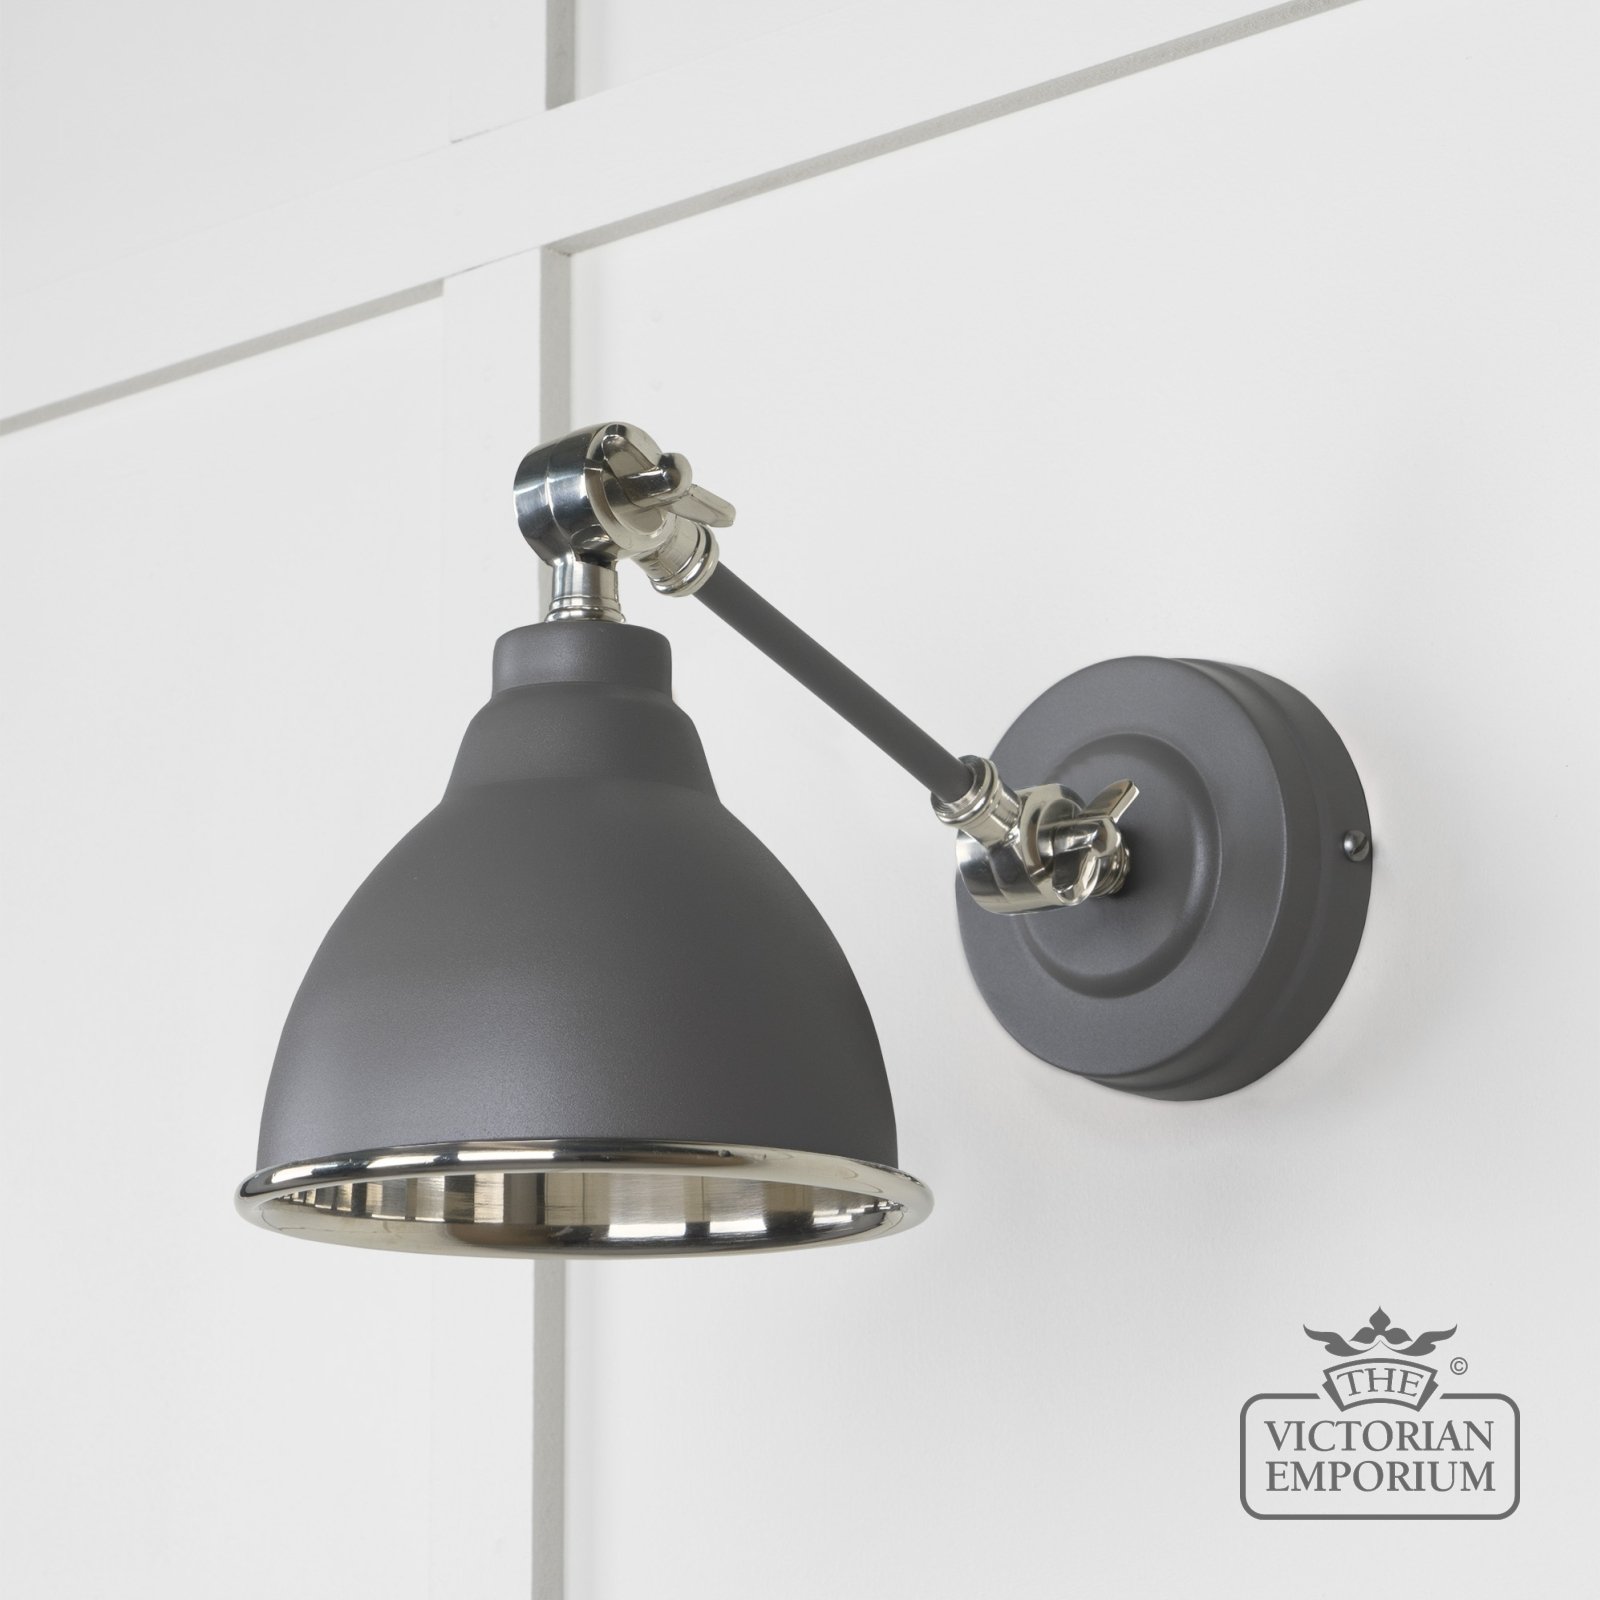 Brindle Wall Light with Smooth Nickel Interior and Bluff Exterior